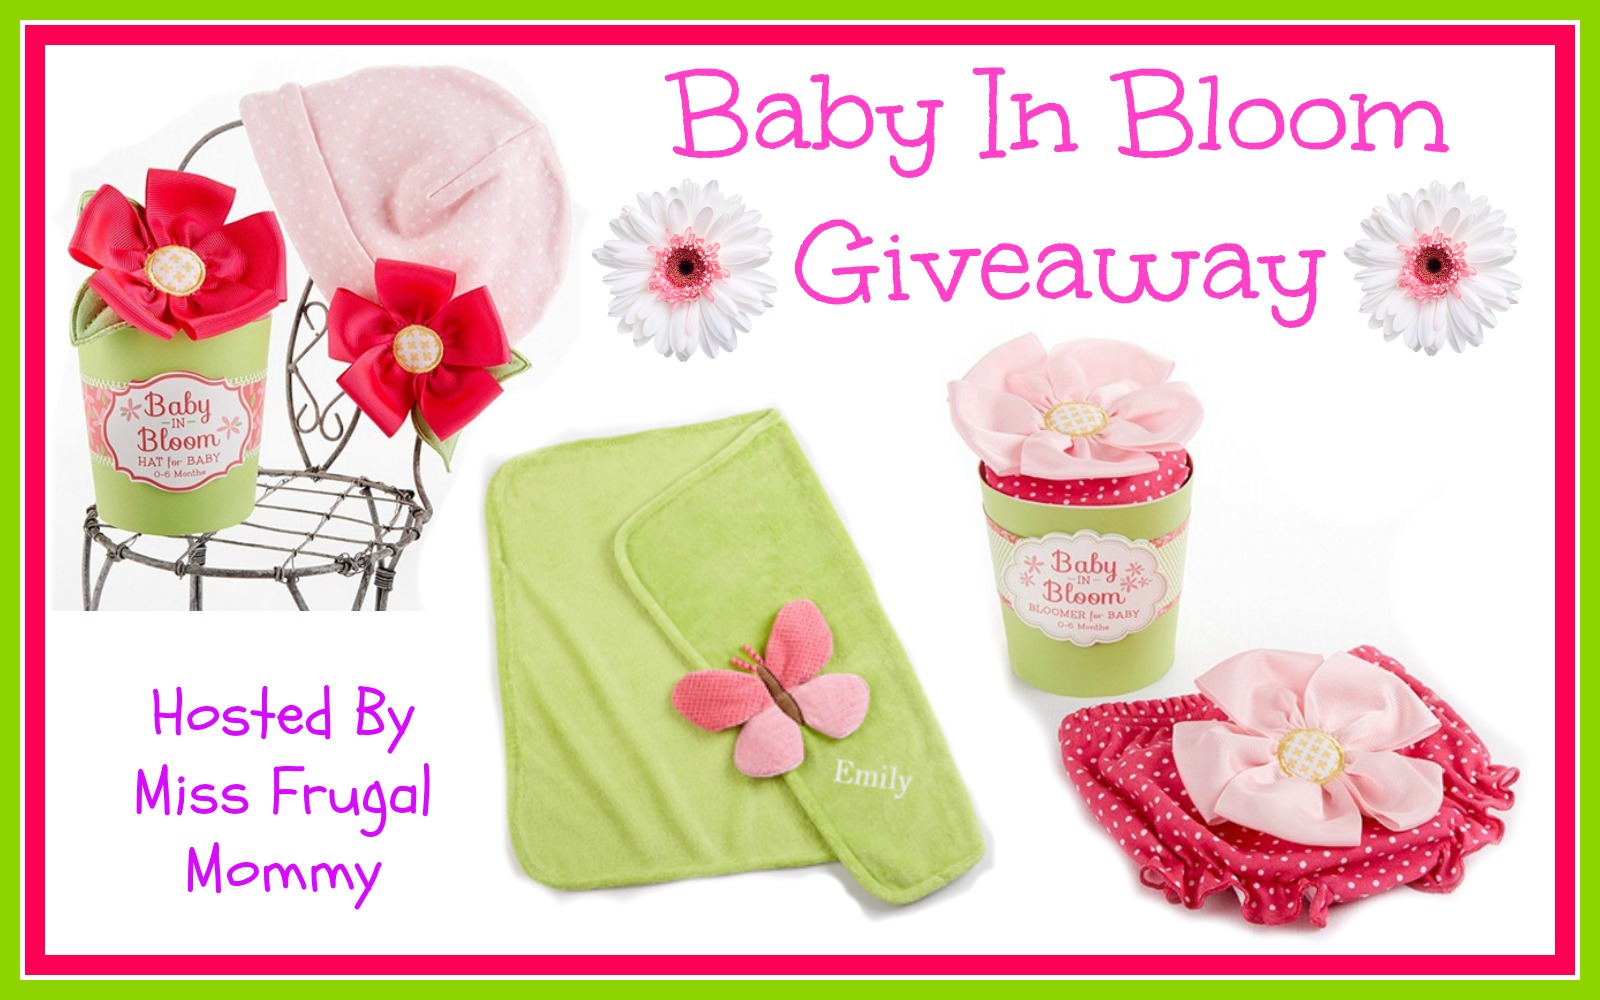 Baby In Bloom Giveaway